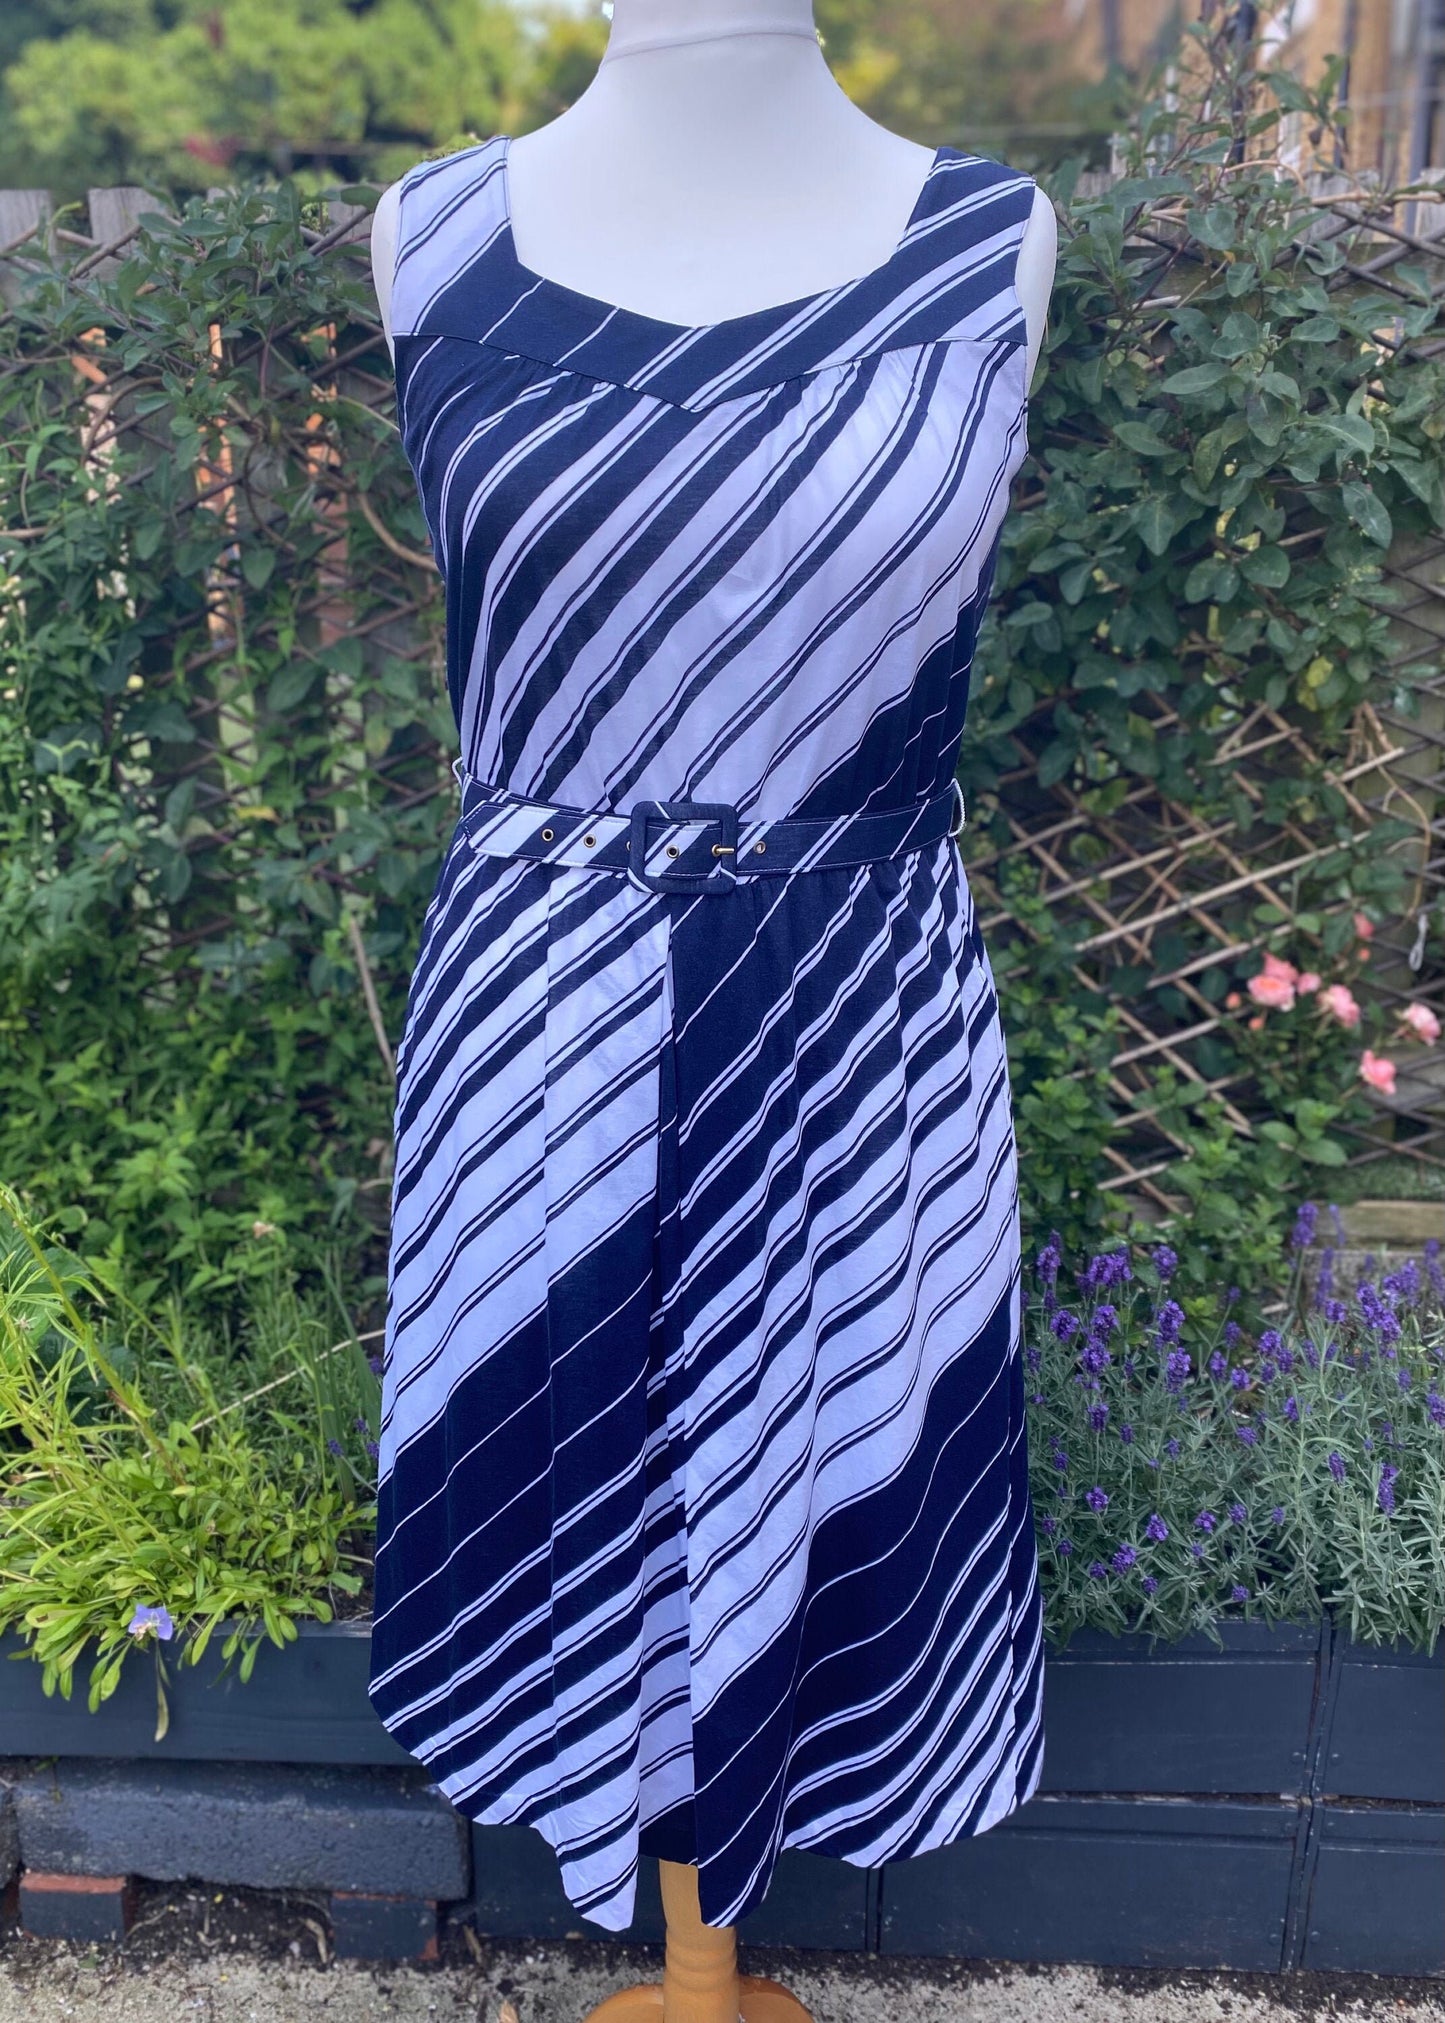 80s navy blue and white striped cotton sundress with matching belt. Approx UK size 14-16